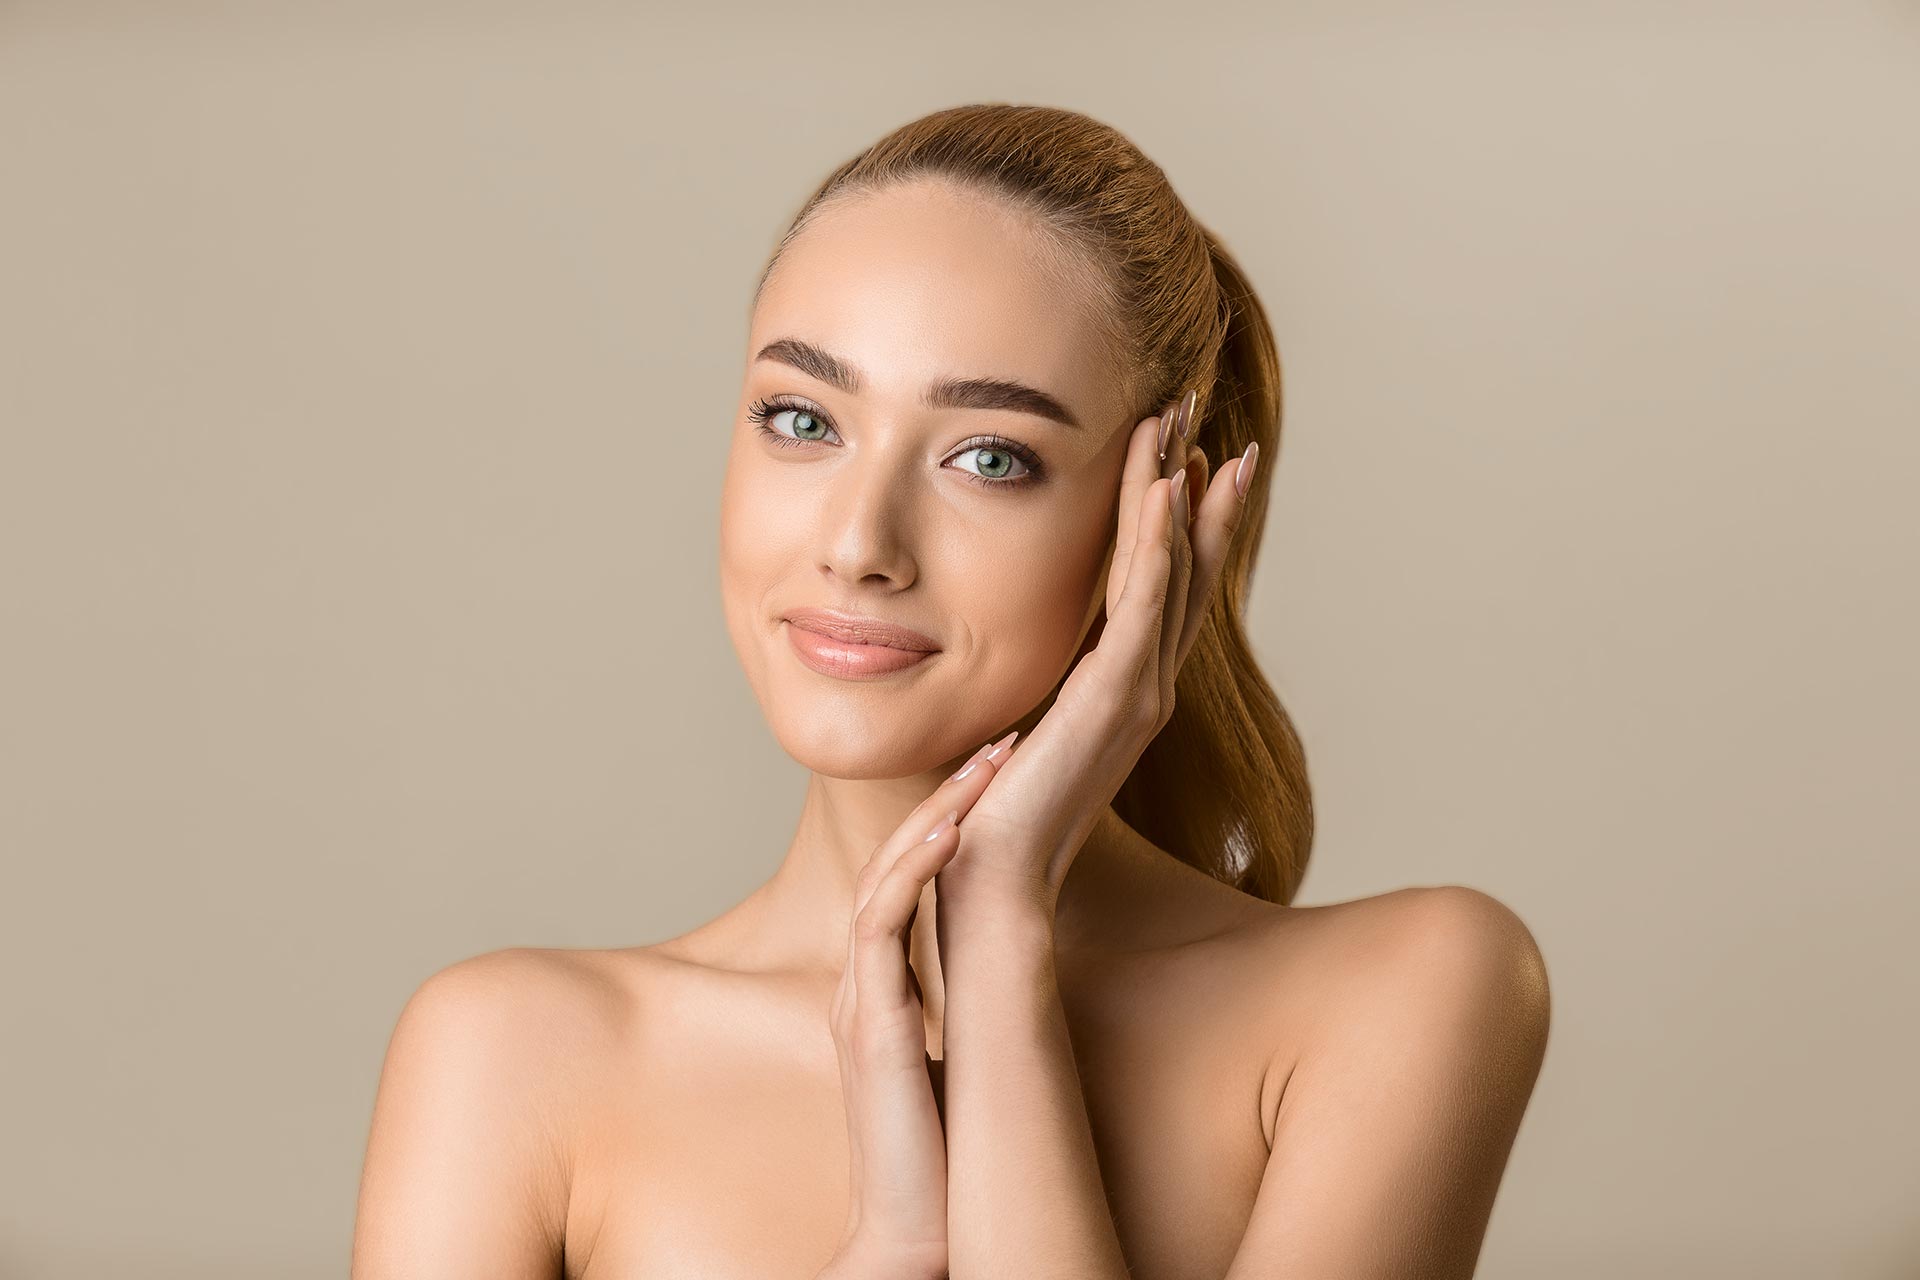 Woman with beautiful skin | Botox and Skin Tightening Services in West Palm Beach